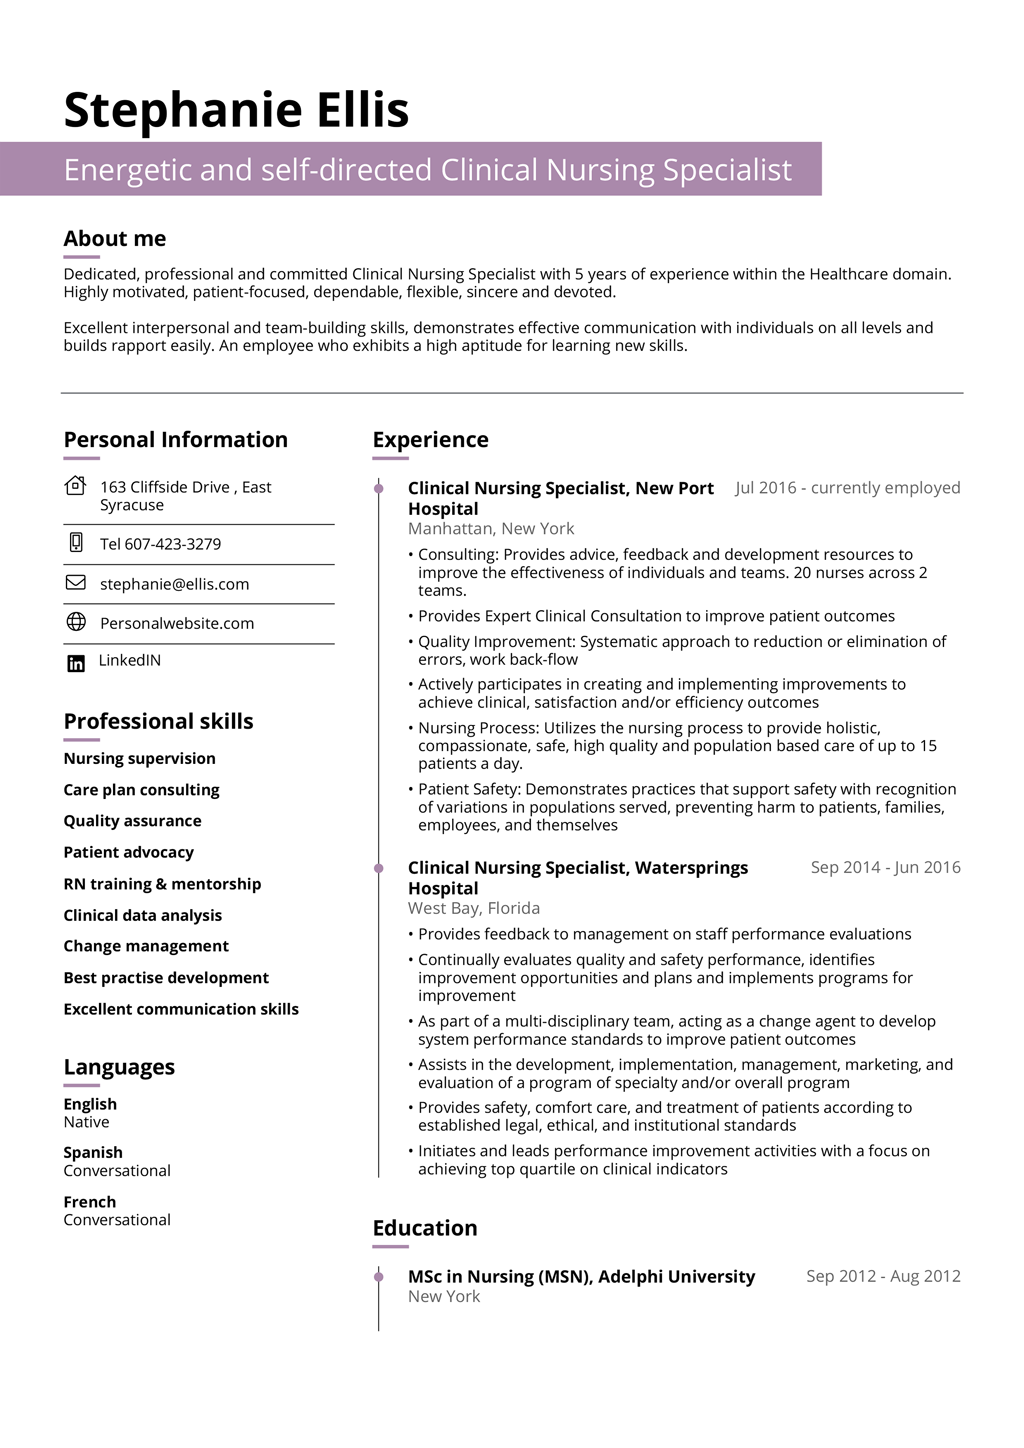 Reverse Chronological Resume Template Download